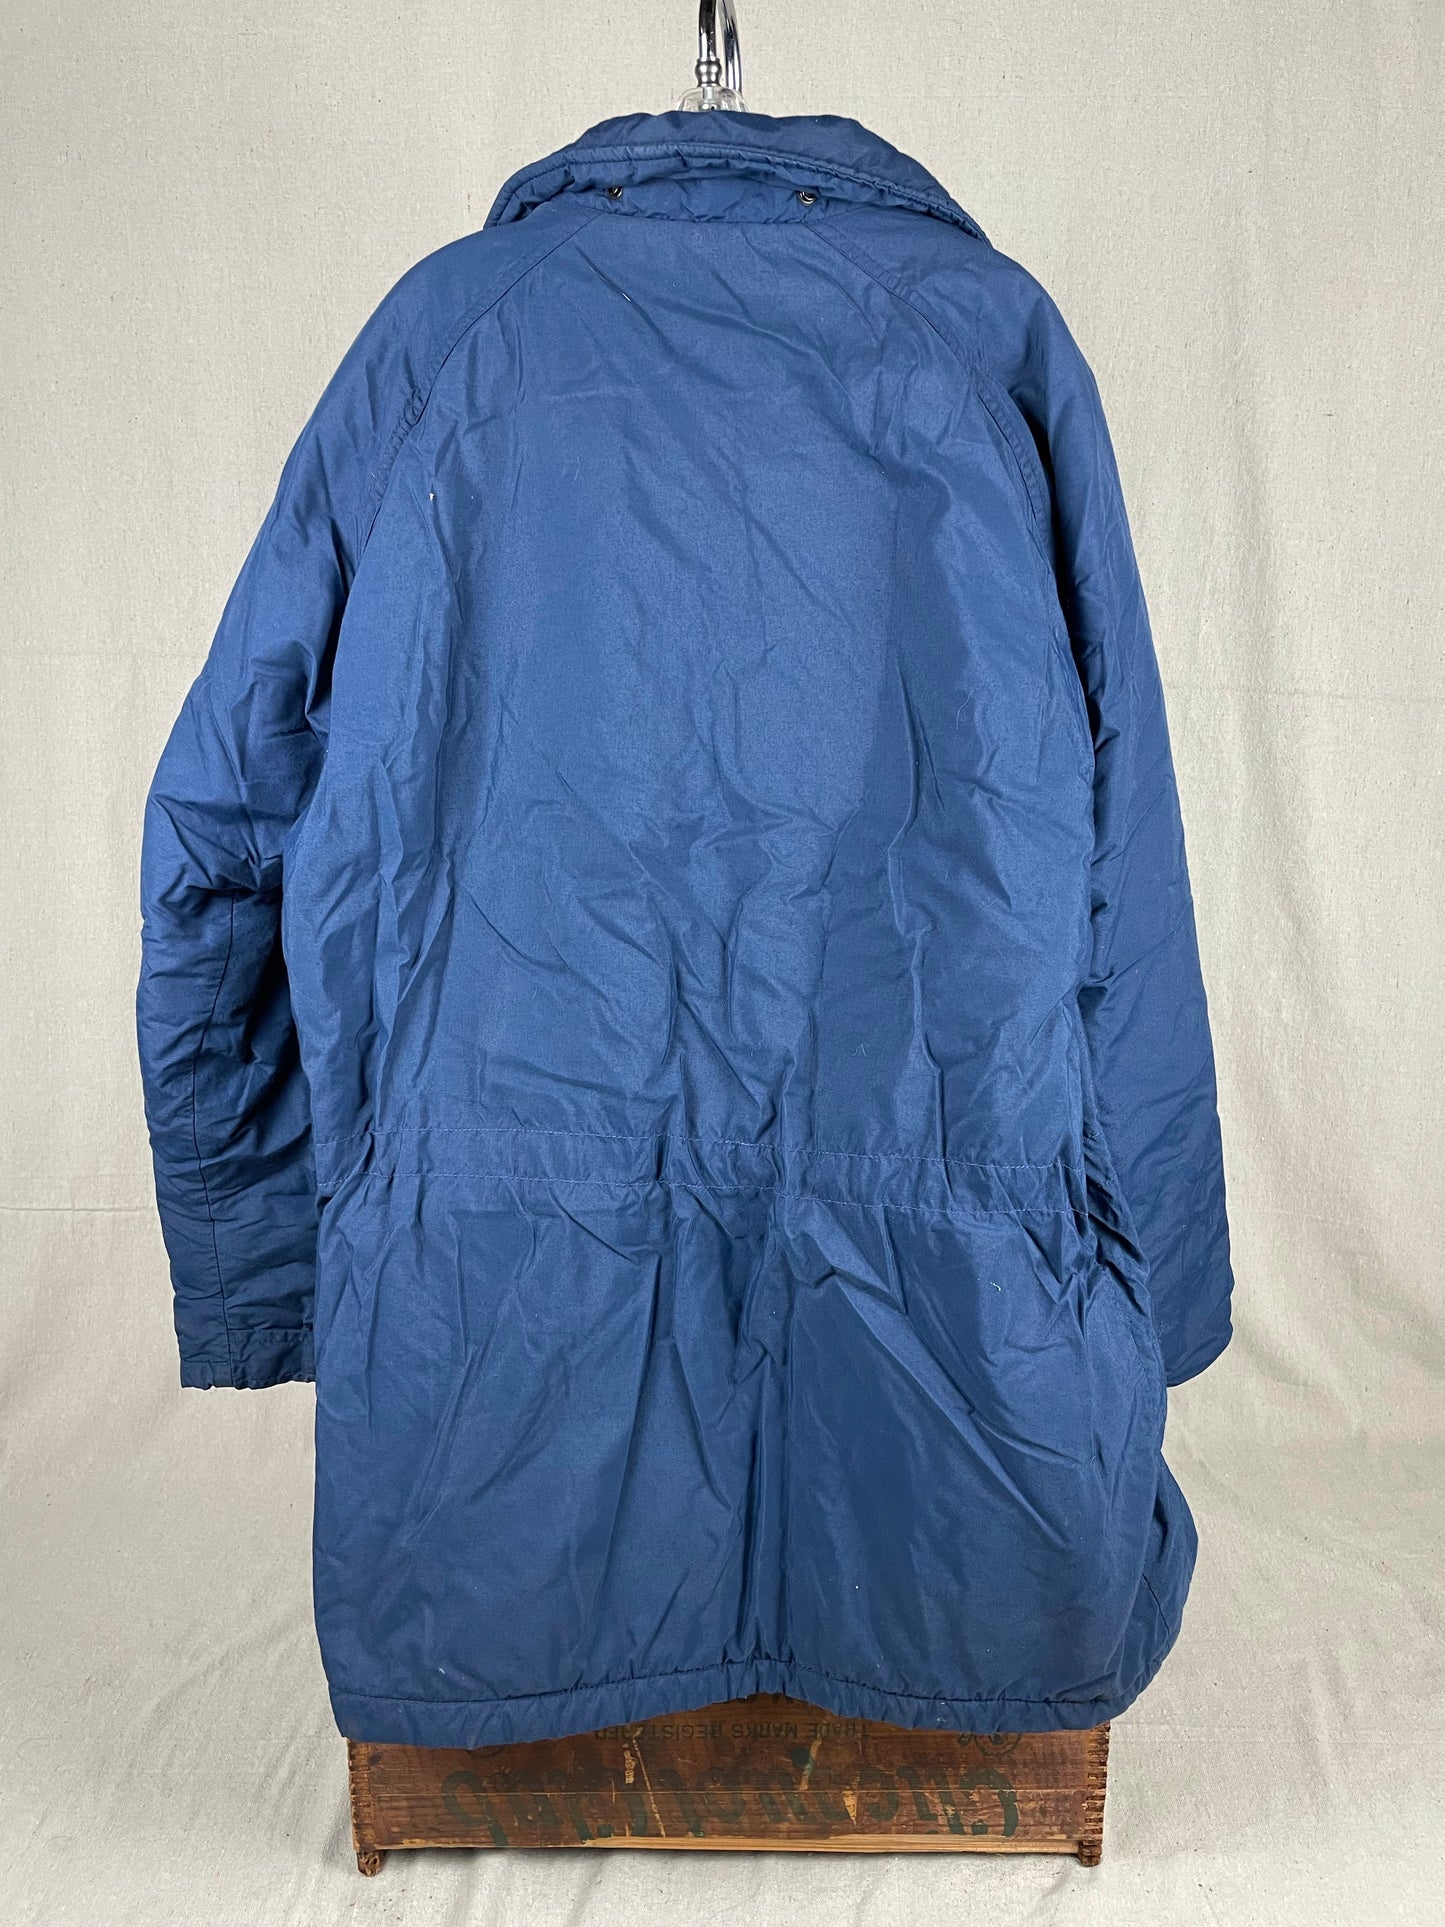 TNF The North Face Jacket